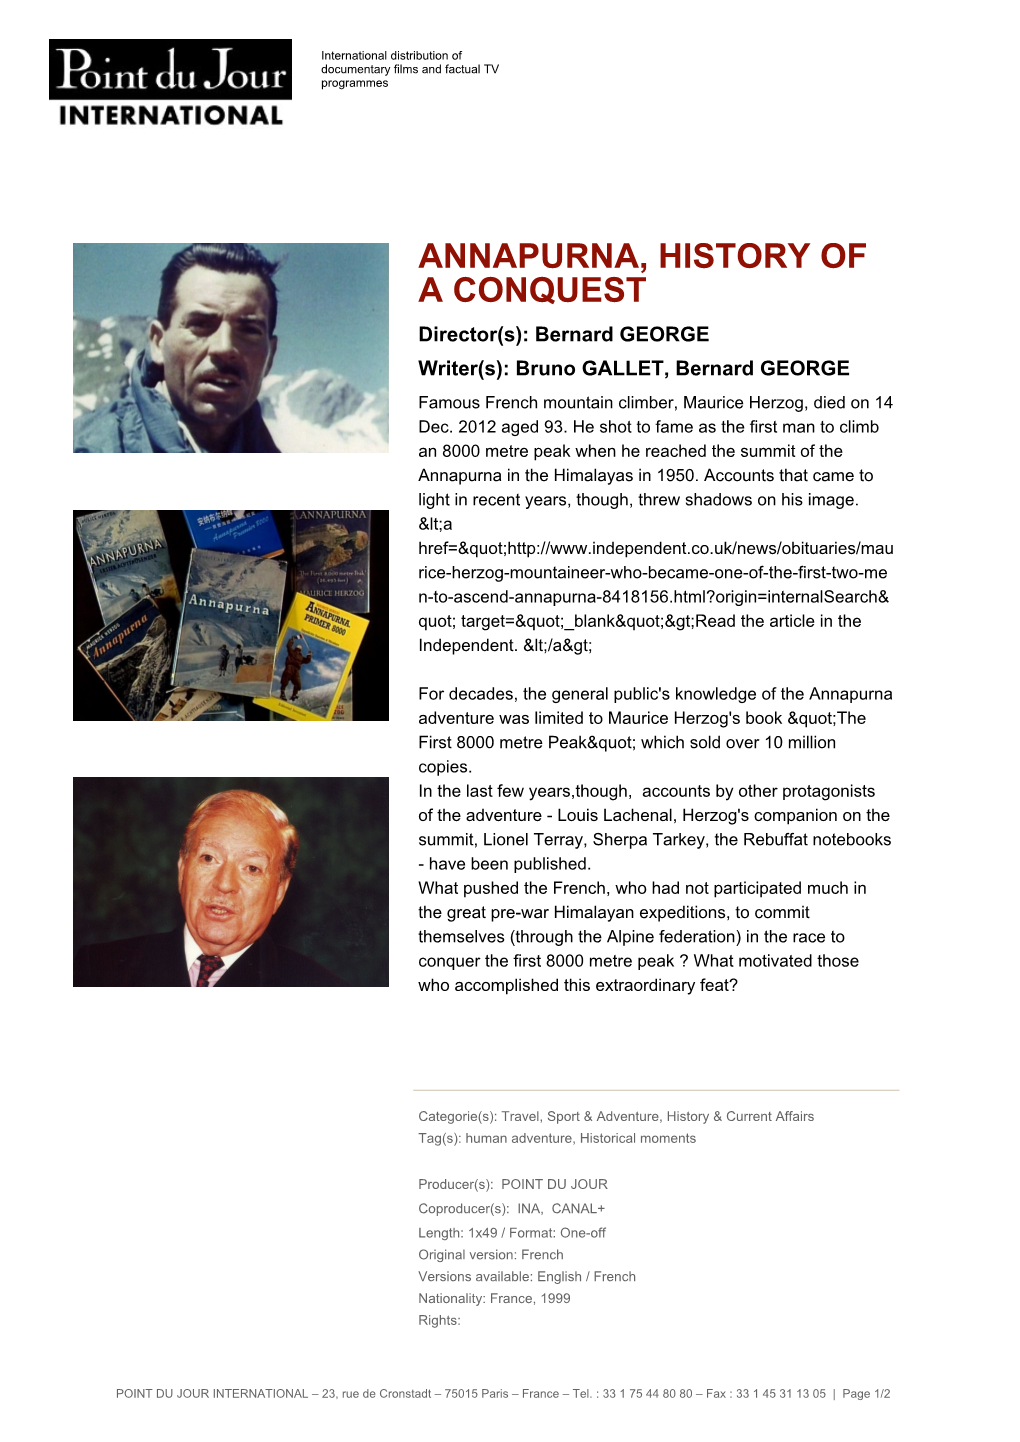 Annapurna, History of a Conquest